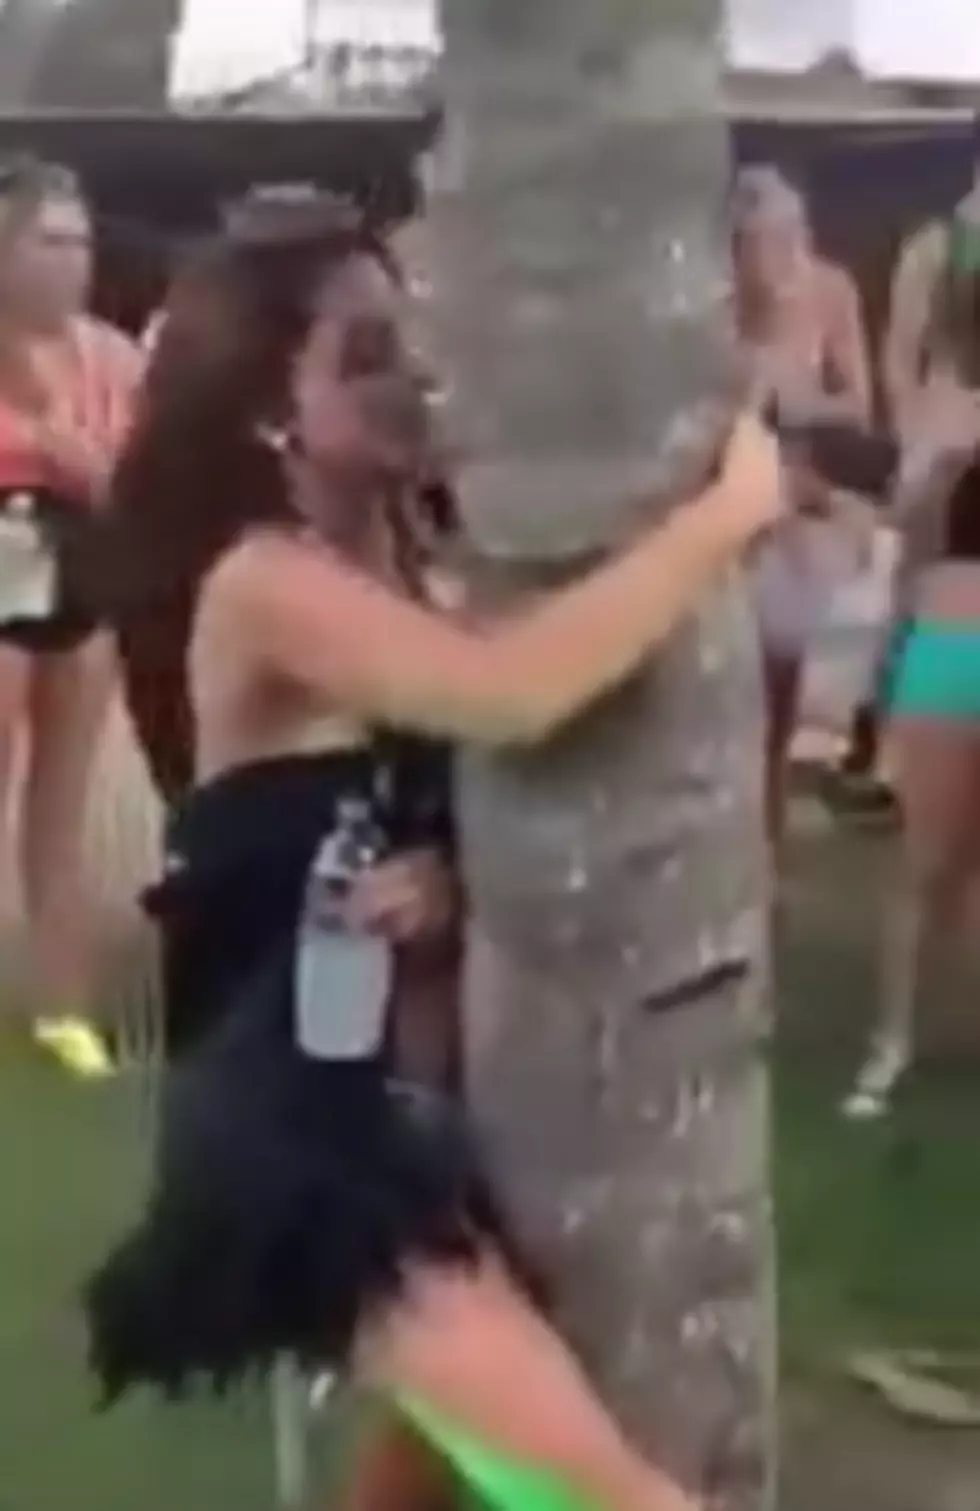 Girl Makes Out With Tree [Video] [NSFW]